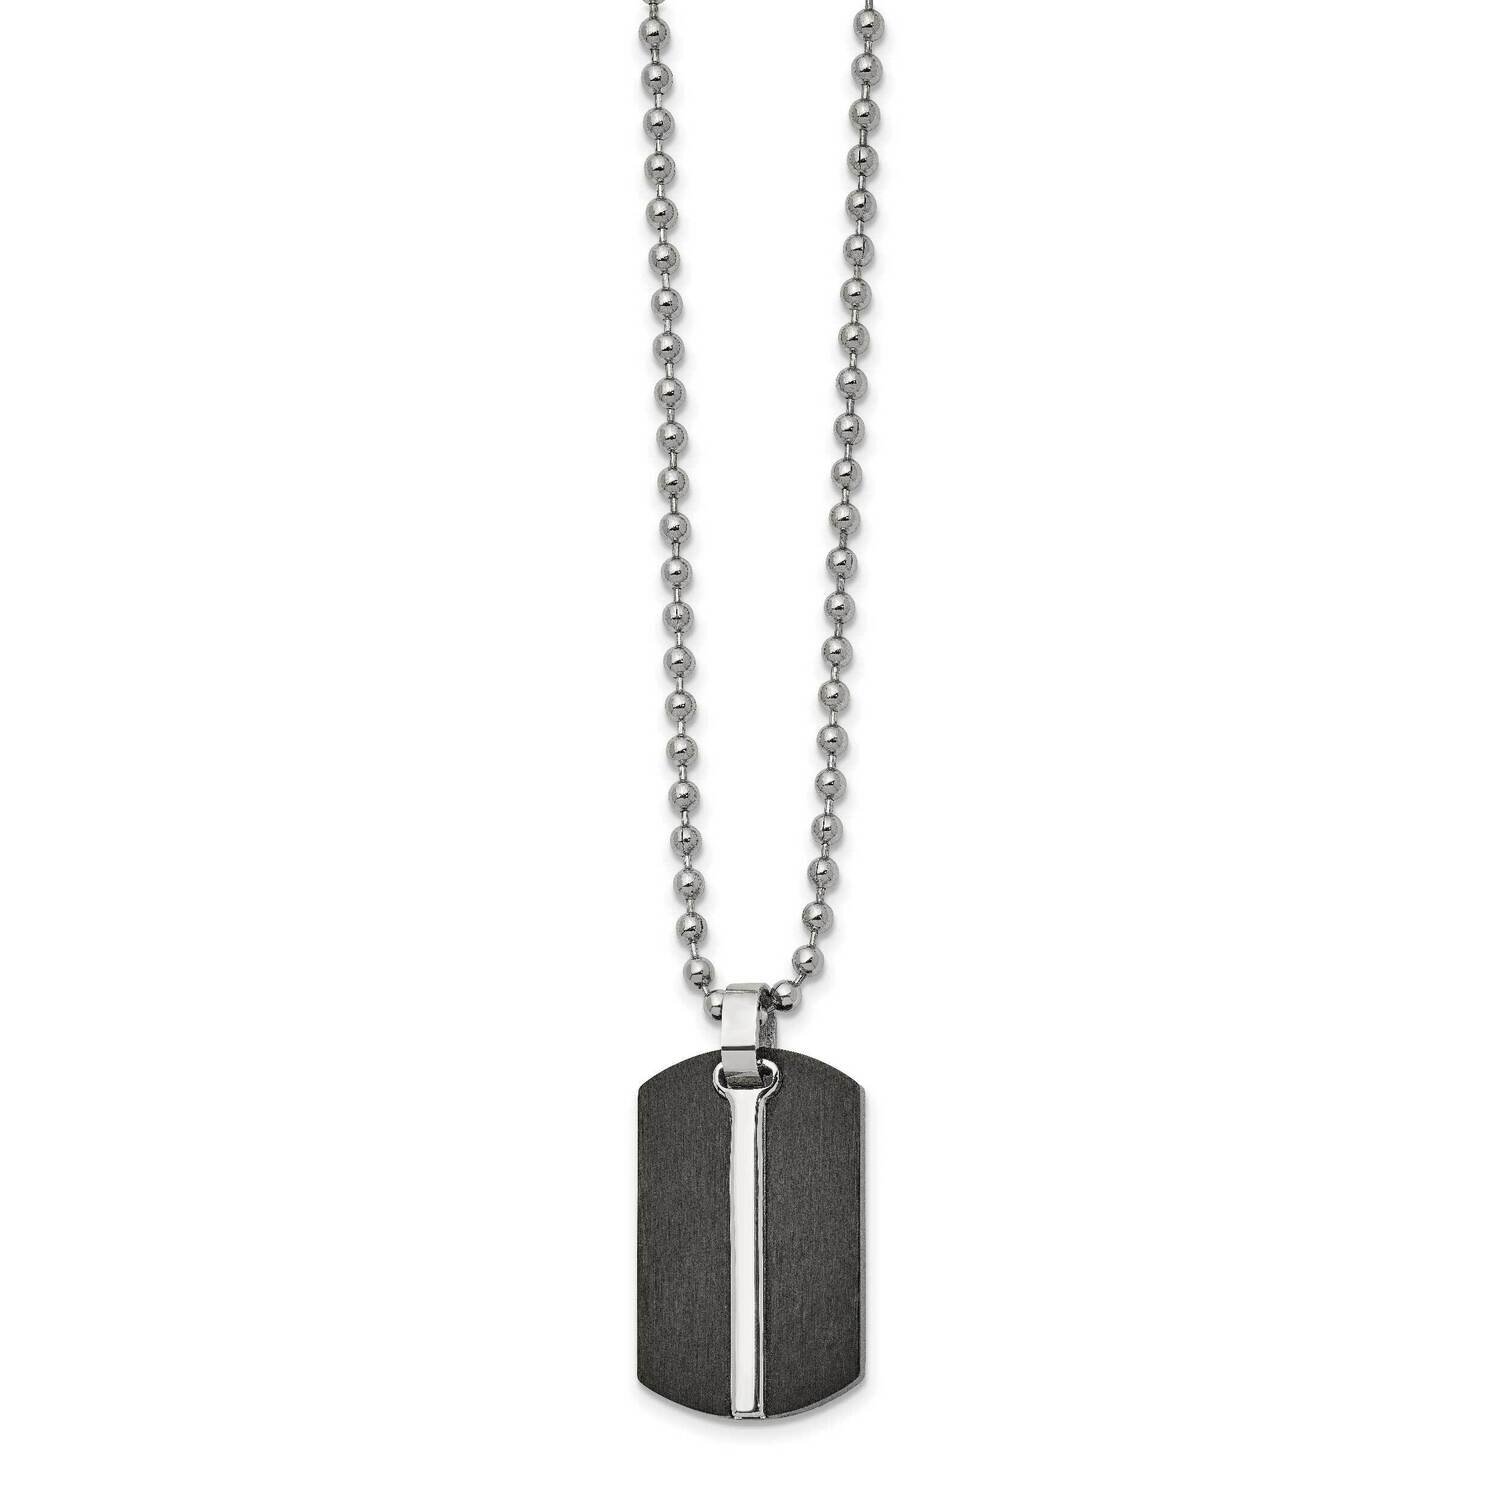 Polished Black Ip-Plated Dog Tag 24 Inch Necklace Stainless Steel Brushed SRN2724-24